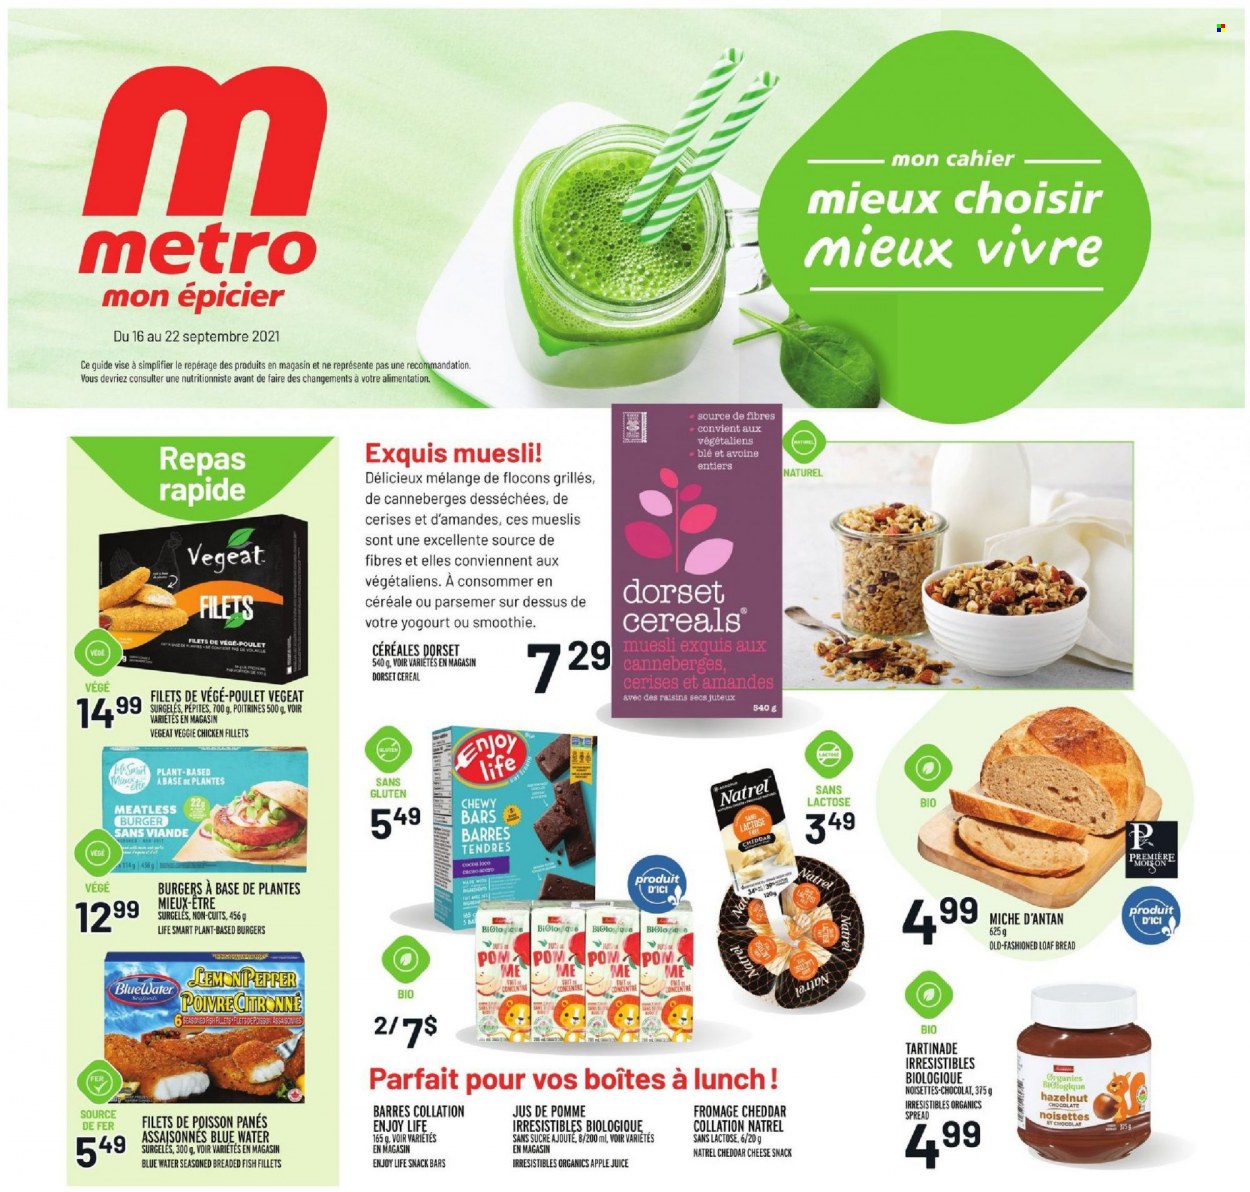 thumbnail - Metro Flyer - September 16, 2021 - September 22, 2021 - Sales products - bread, fish fillets, fish, hamburger, breaded fish, cheddar, cheese, chocolate, snack, snack bar, cocoa, cereals, muesli, dried fruit, apple juice, juice, smoothie, raisins. Page 1.